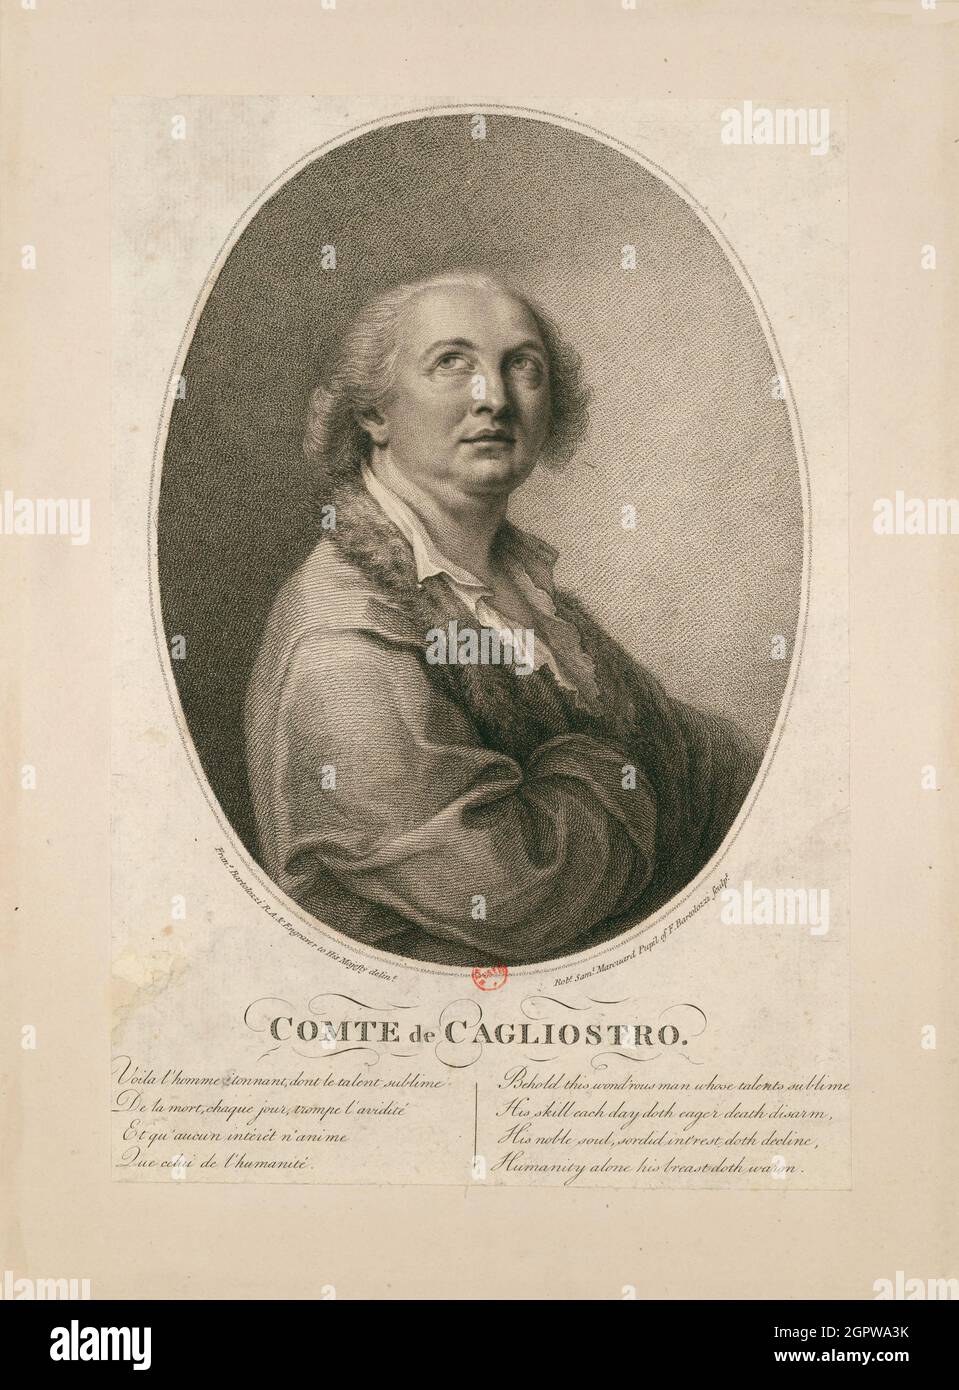 Count Alessandro di Cagliostro (1743-1795). Found in the Collection of the Biblioth&#xe8;que Nationale de France. Stock Photo